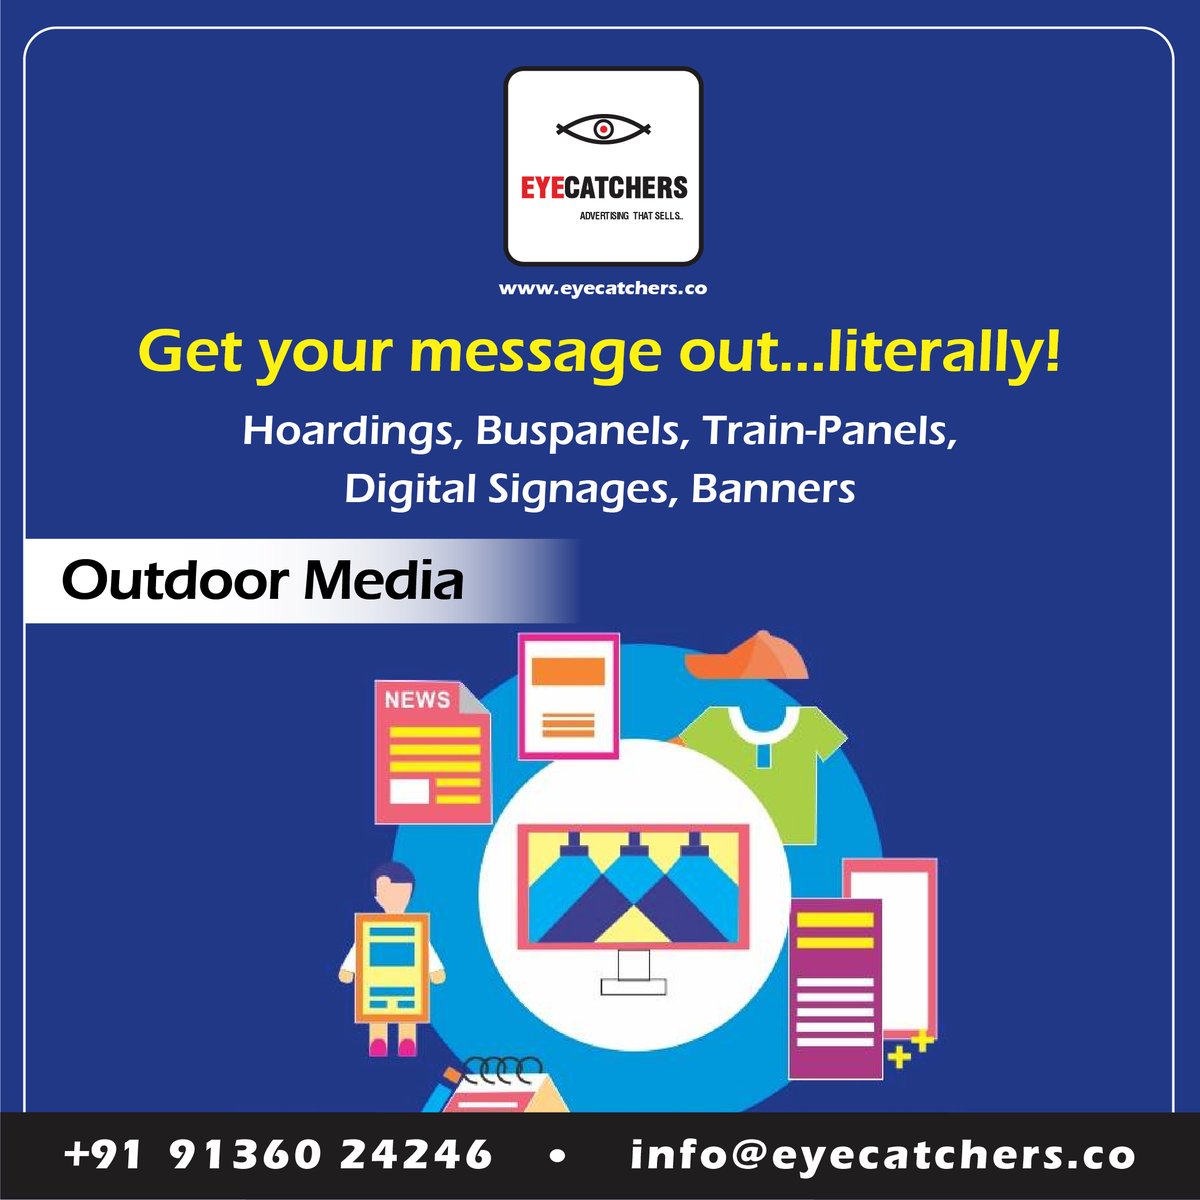 Get Your Message Out... Literally with #Eyecatchers - #Advertising that sells
Bespoke End-to-End Outdoor Communication Solutions.

#Eyecatchers #Branding #Creative #DigitalMarketing #ContentMarketing #Careerindigital #Marketingtips #digitalmarketingfacts #digitalmarketinghacks